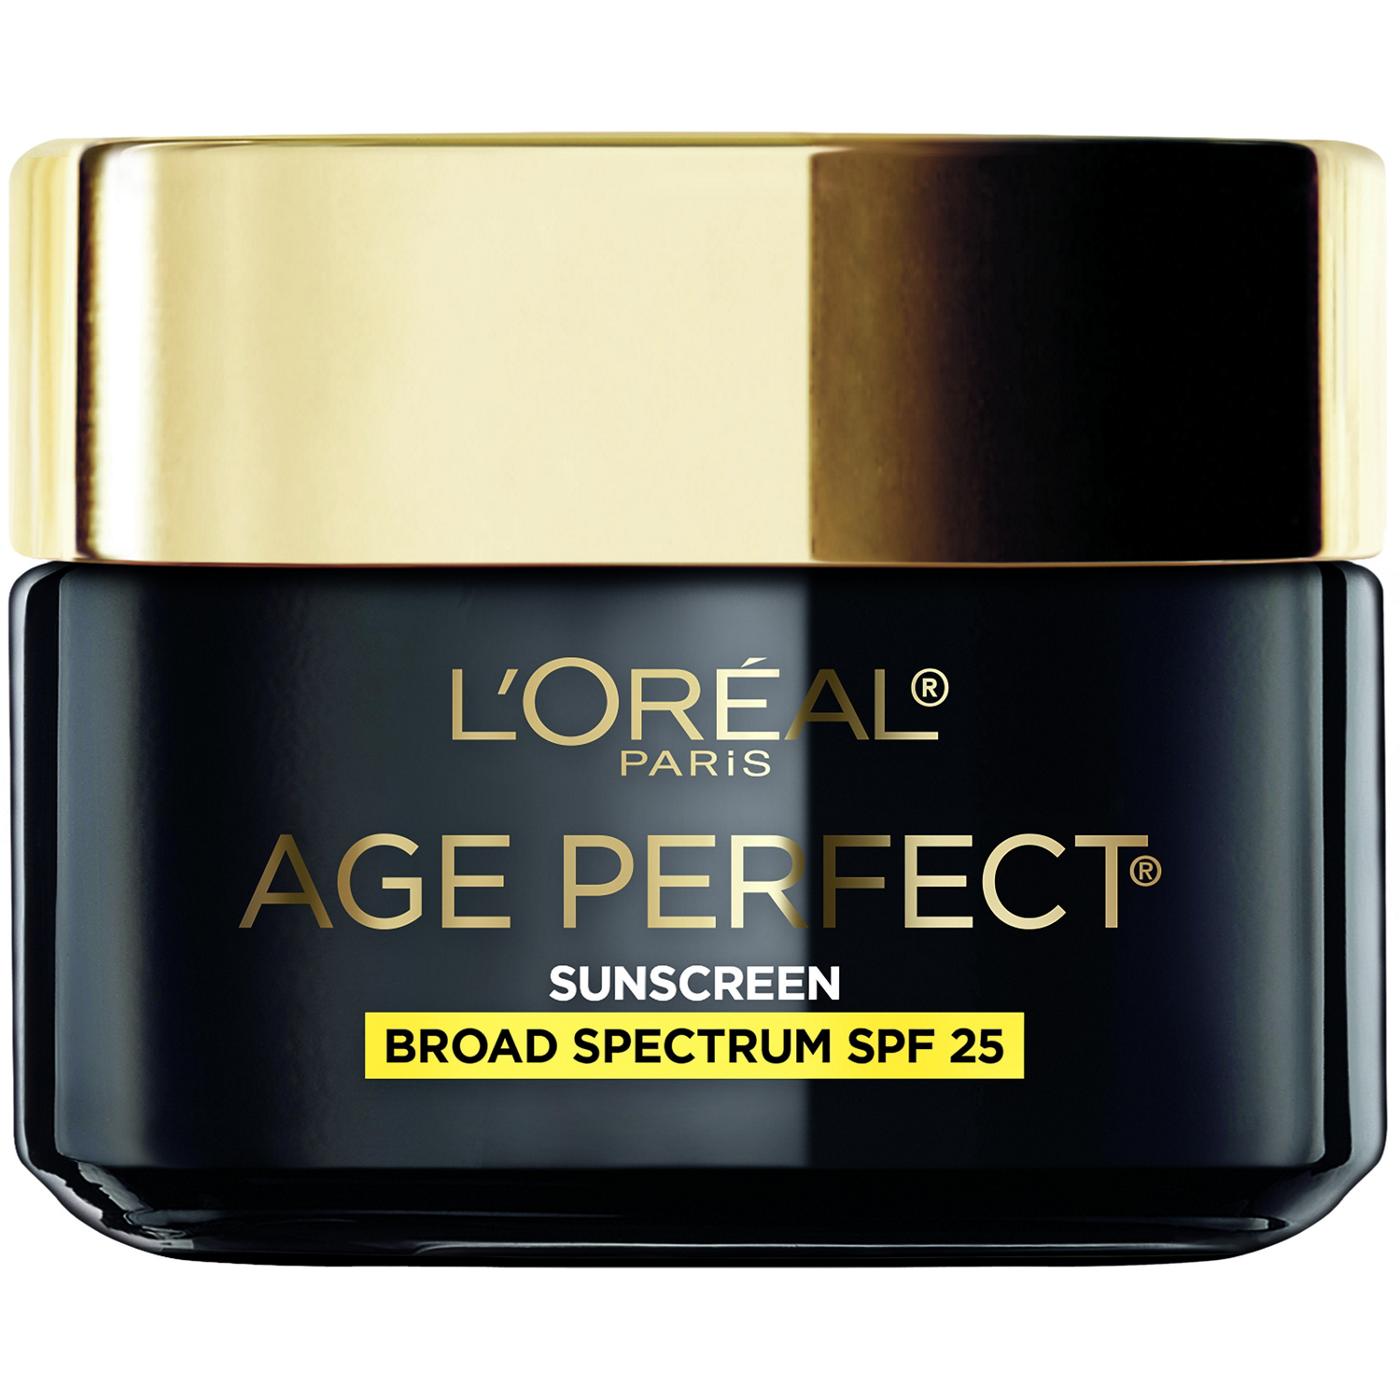 L'Oréal Paris Age Perfect Cell Renewal Anti-Aging Day Moisturizer SPF 25; image 5 of 5